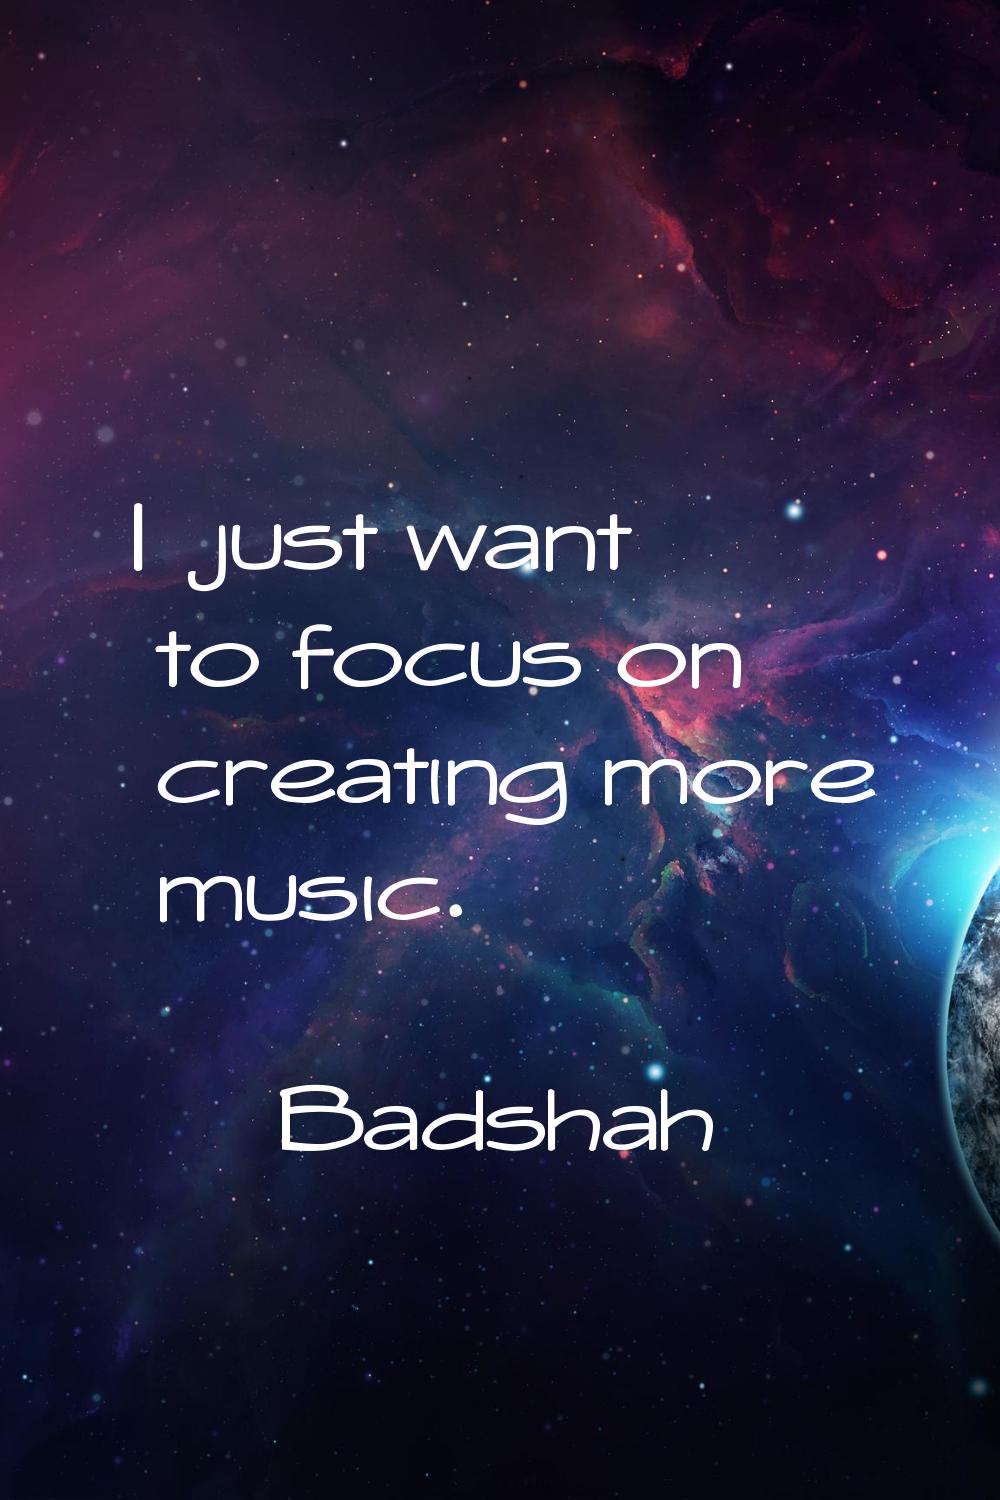 I just want to focus on creating more music.